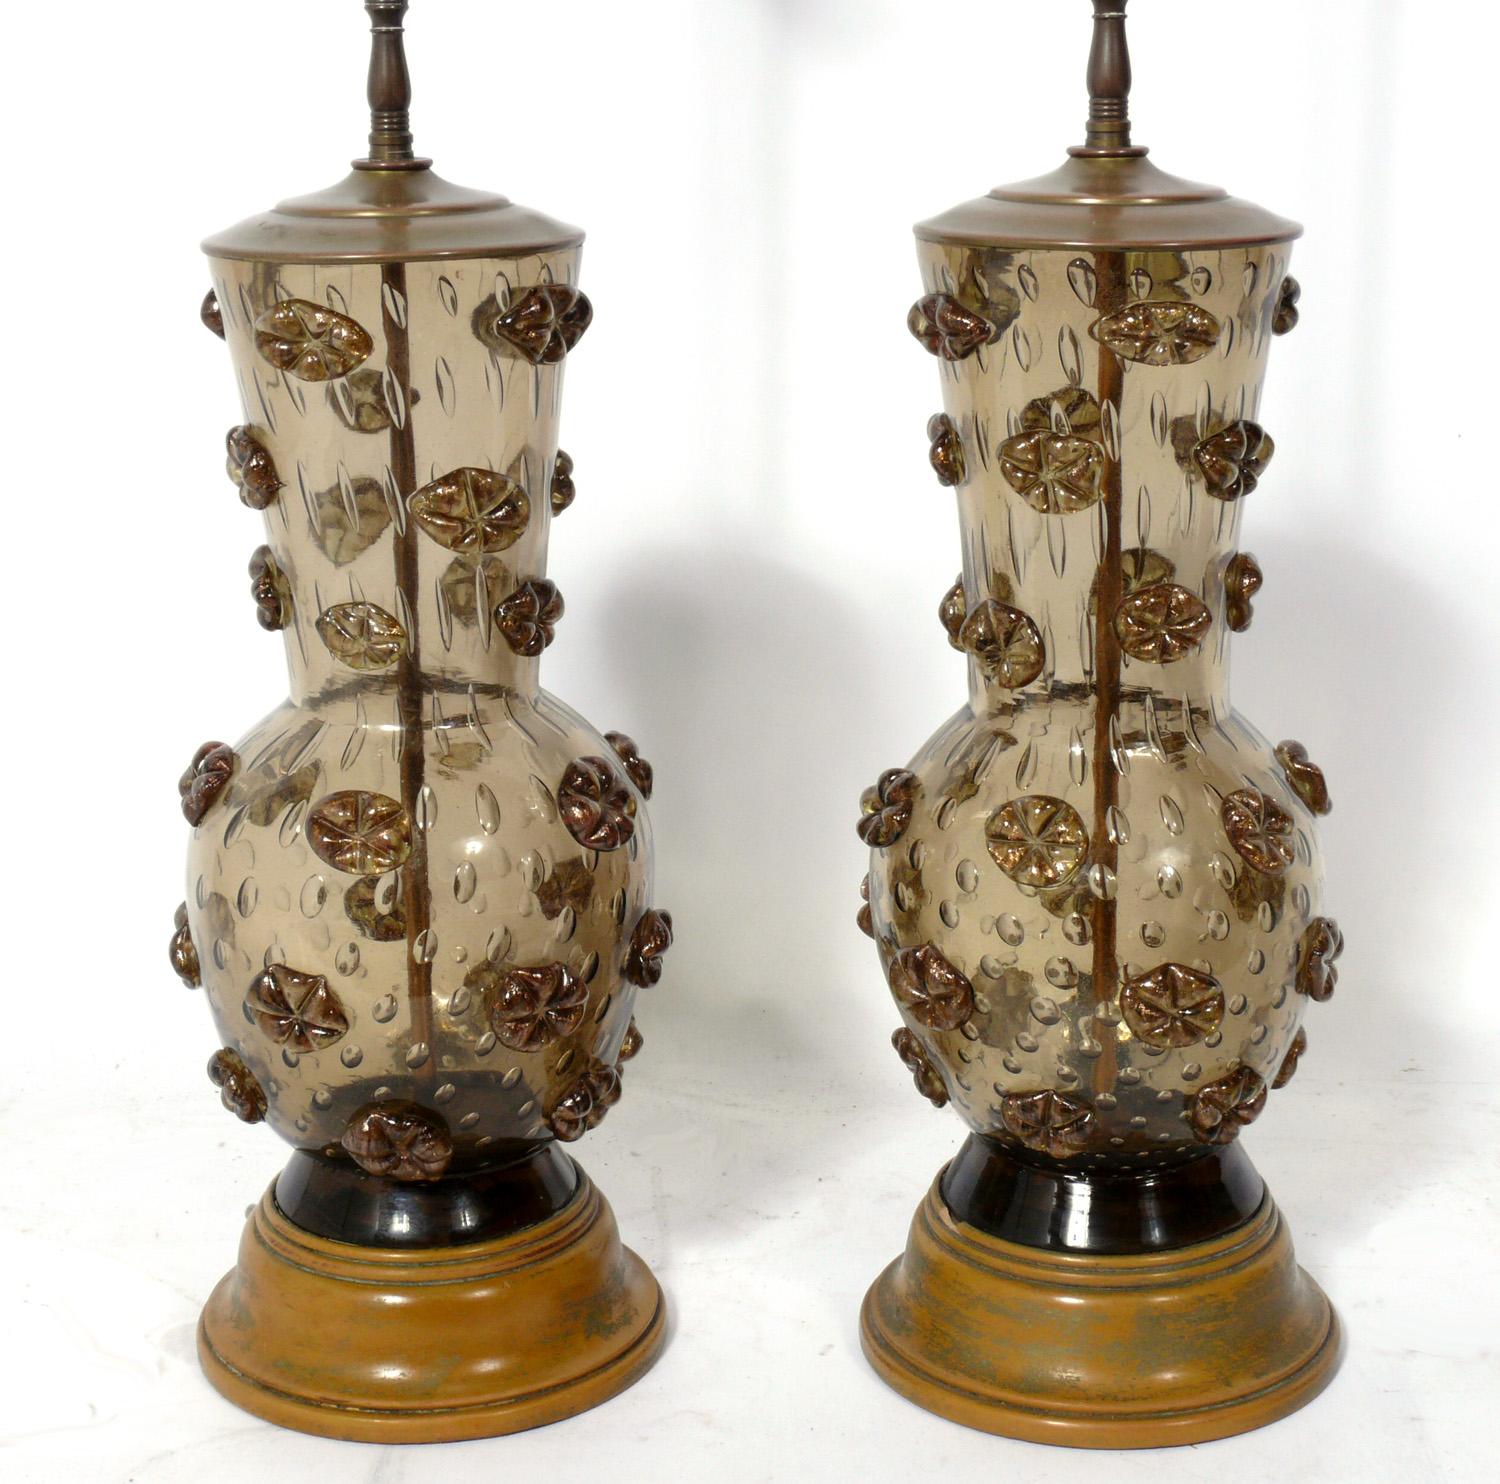 Pair of Murano glass lamps, Italy, circa 1960s. They are a champagne-brown color. They have been rewired and are ready to use. The price noted includes the shades.